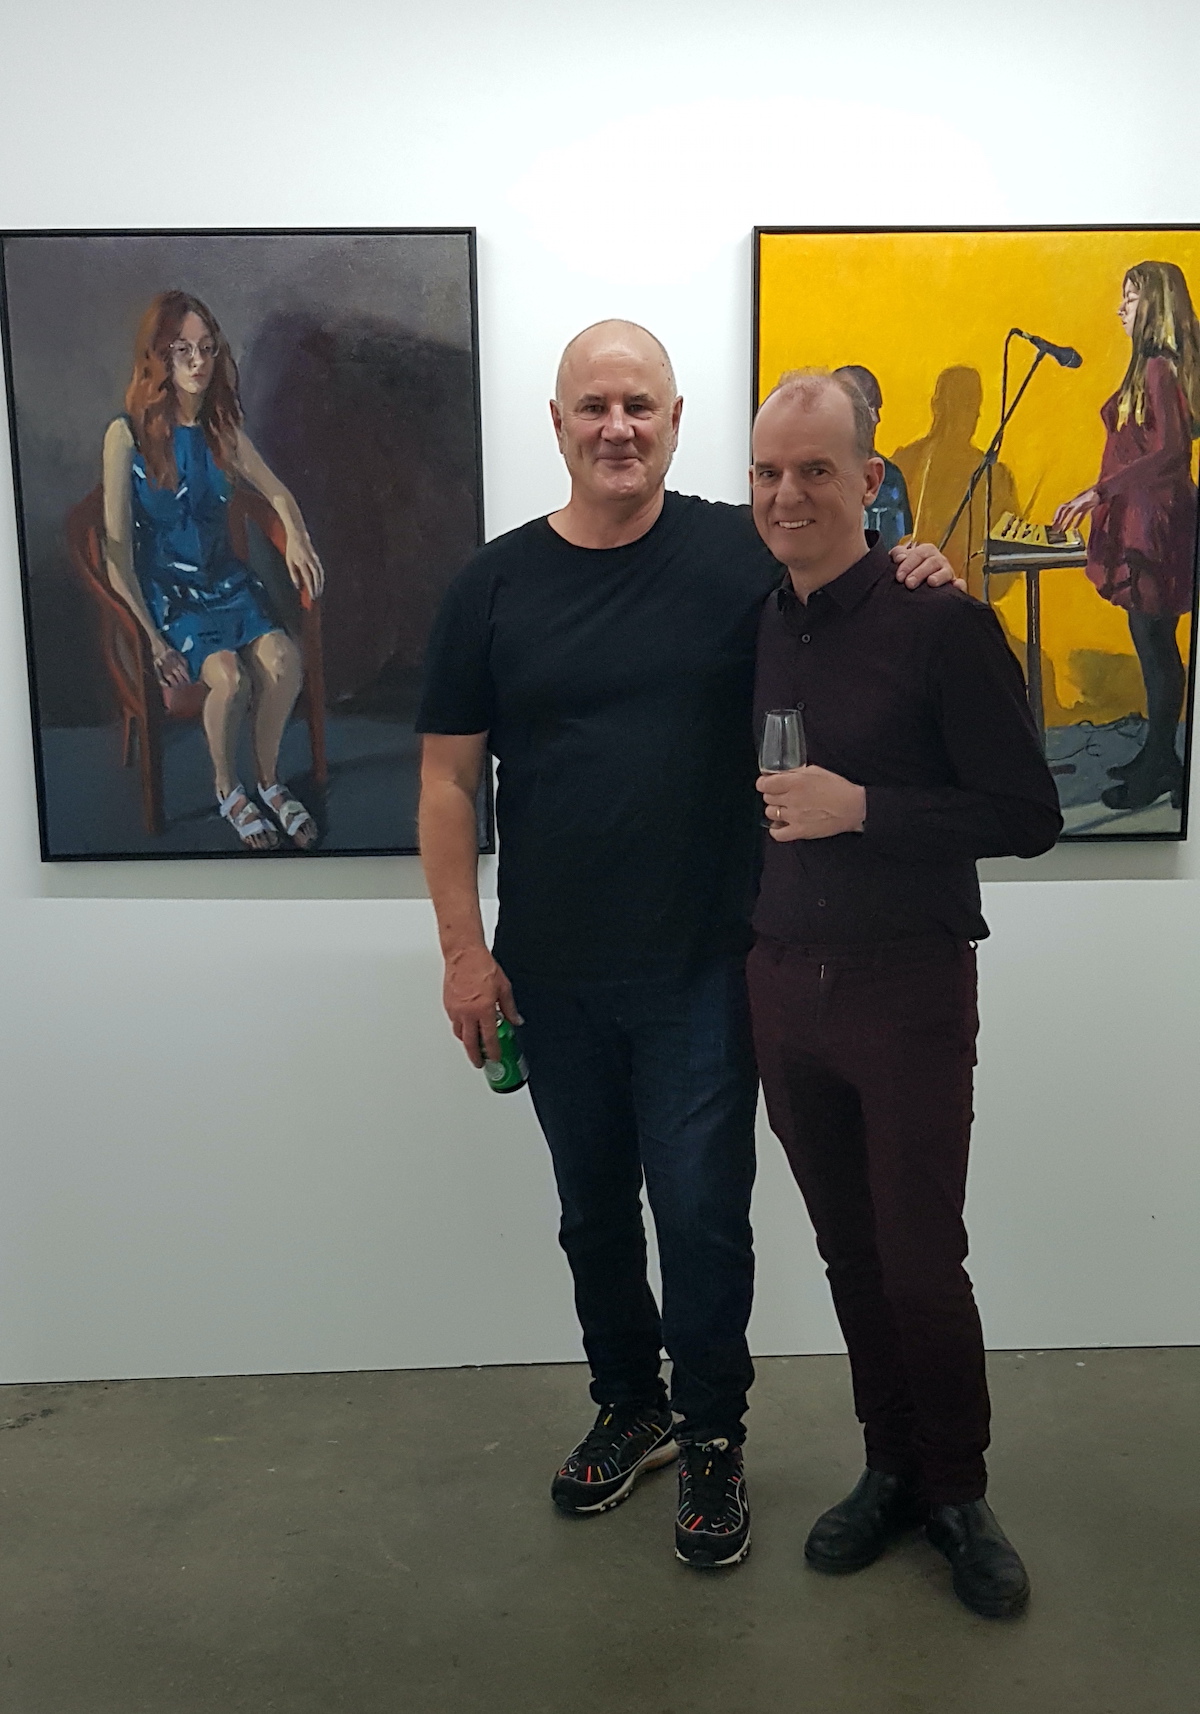 Chris Hopewell (left) with Kevin Robertson at the opening of Mimesis, curated by Kevin. November 2021. In the background paintings by Kevin Robertson, L-R: Kate, 2020 and Music, 2020.